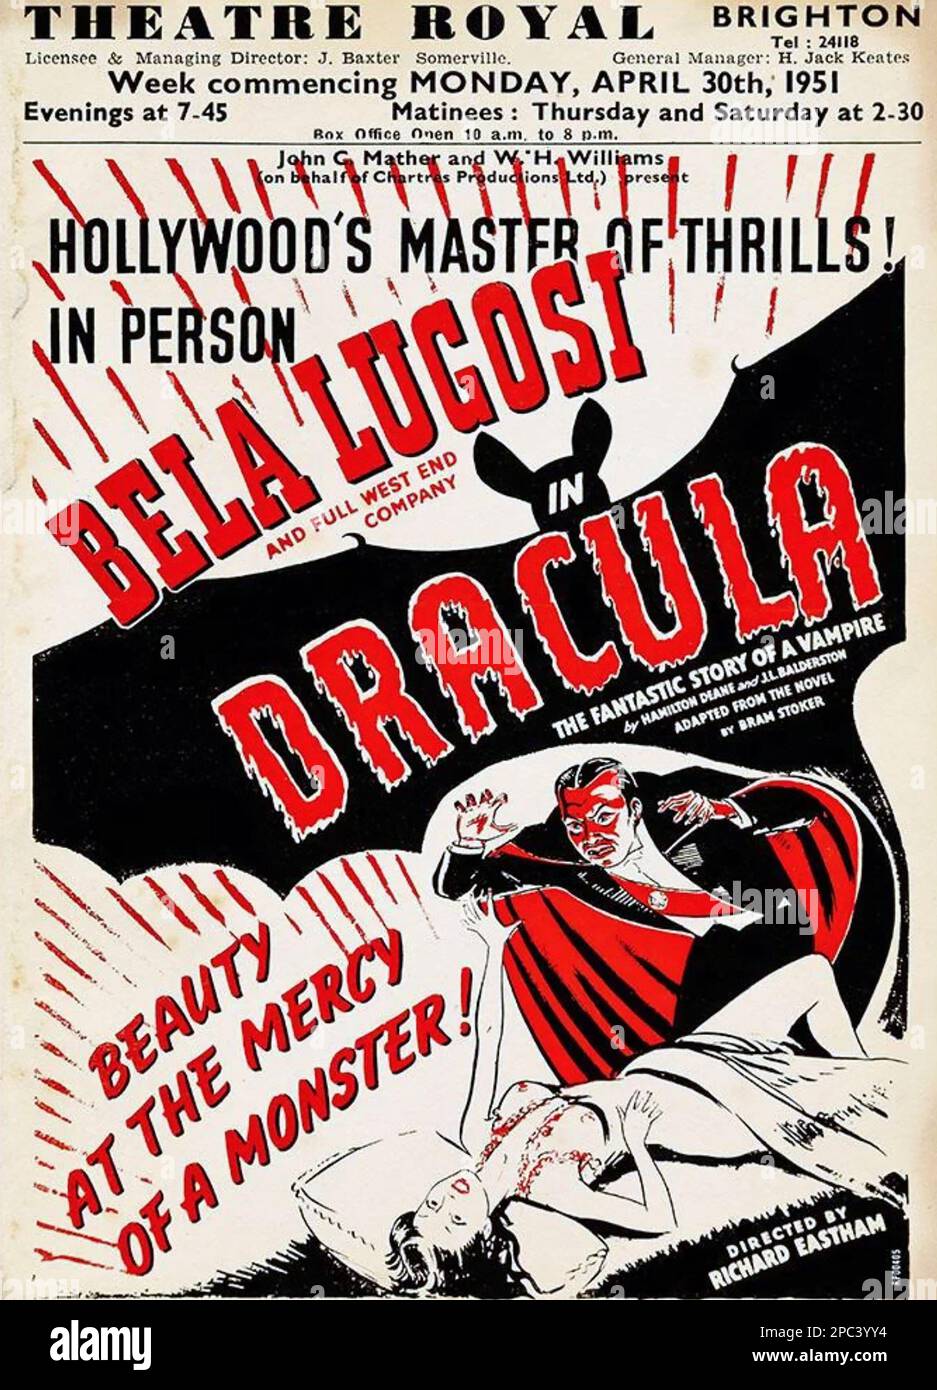 BELA LUGOSI (1882-1956) Hungarian American film and stage actor. Poster for one of his stage appearances during his 1951 UK tour. Stock Photo